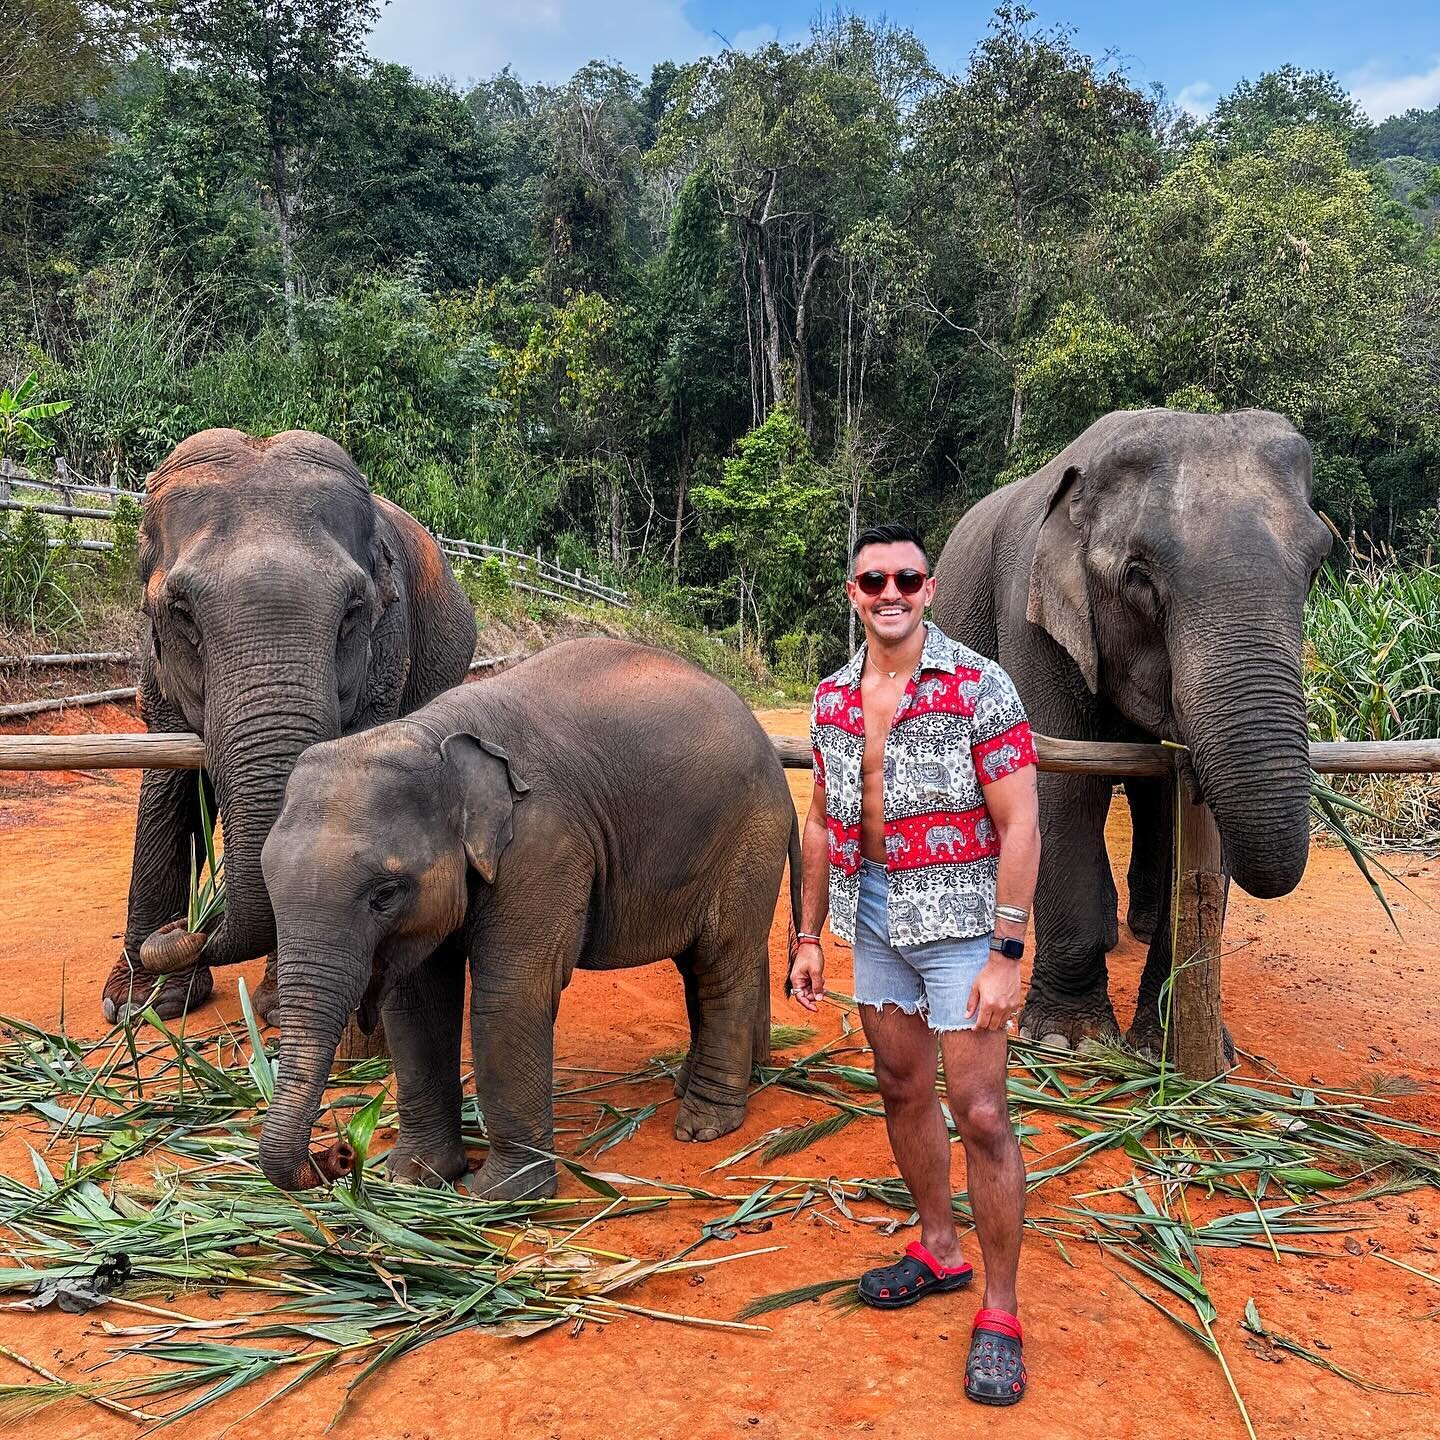 Just a couple of jungle boys living their jungle dreams! 🐘 🌴😎 #Thailand #DiegoDowntown